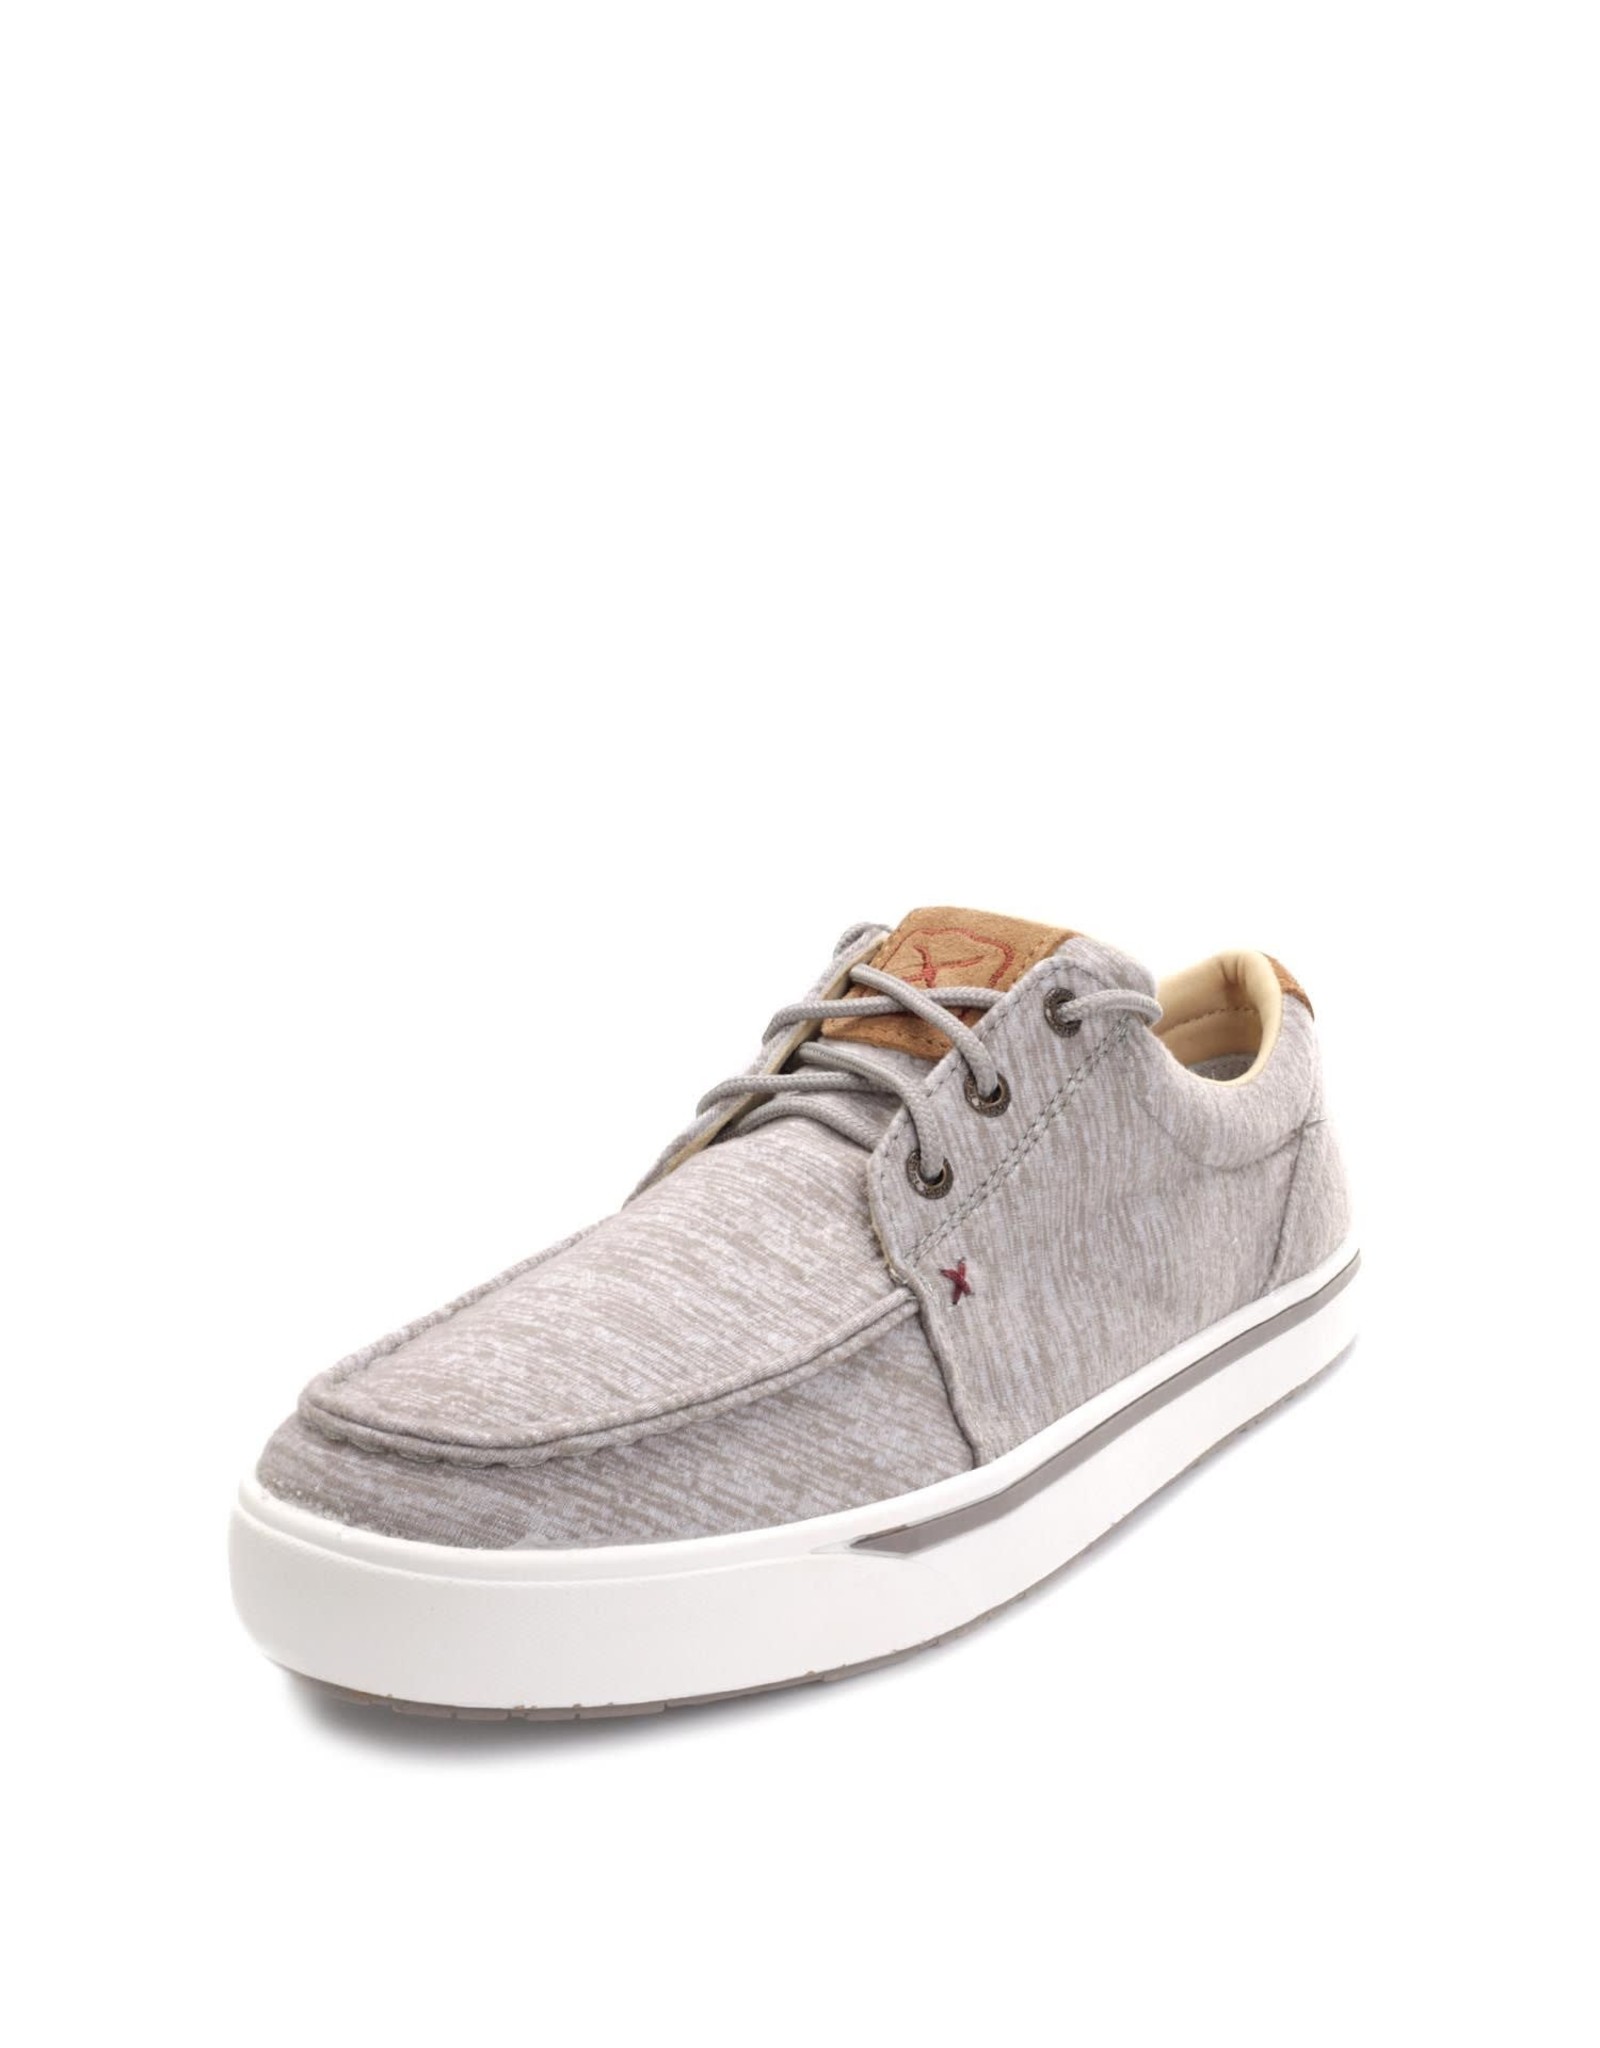 Twisted X Mens MCA0052 Taupe Kicks Casual Shoes no reorder